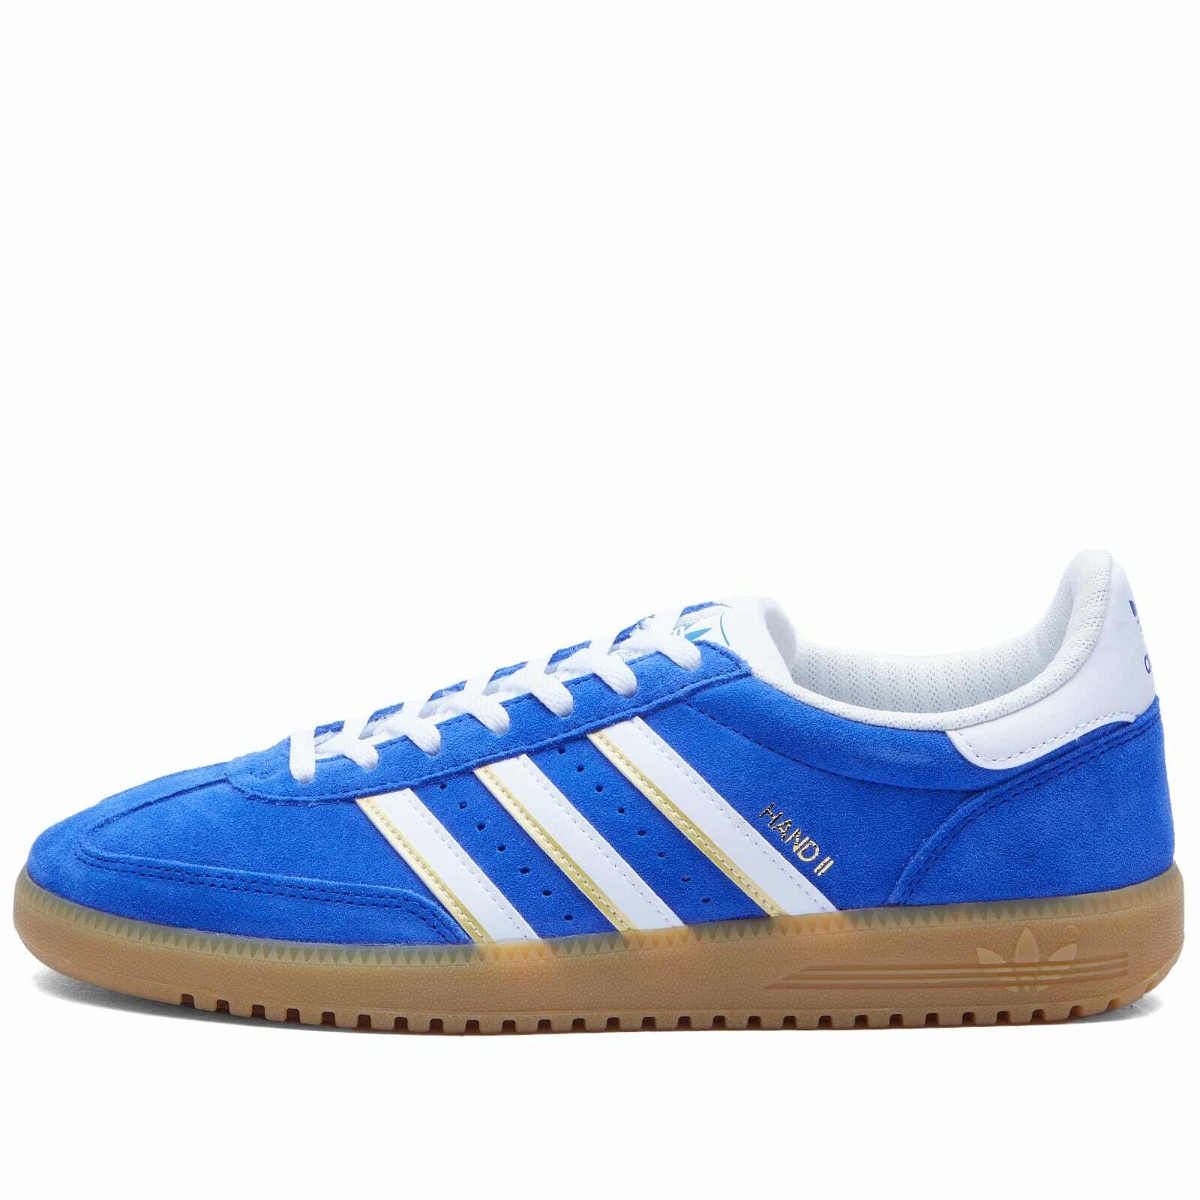 Adidas Hand Blue/White 2 in adidas Sneakers Semi Lucid